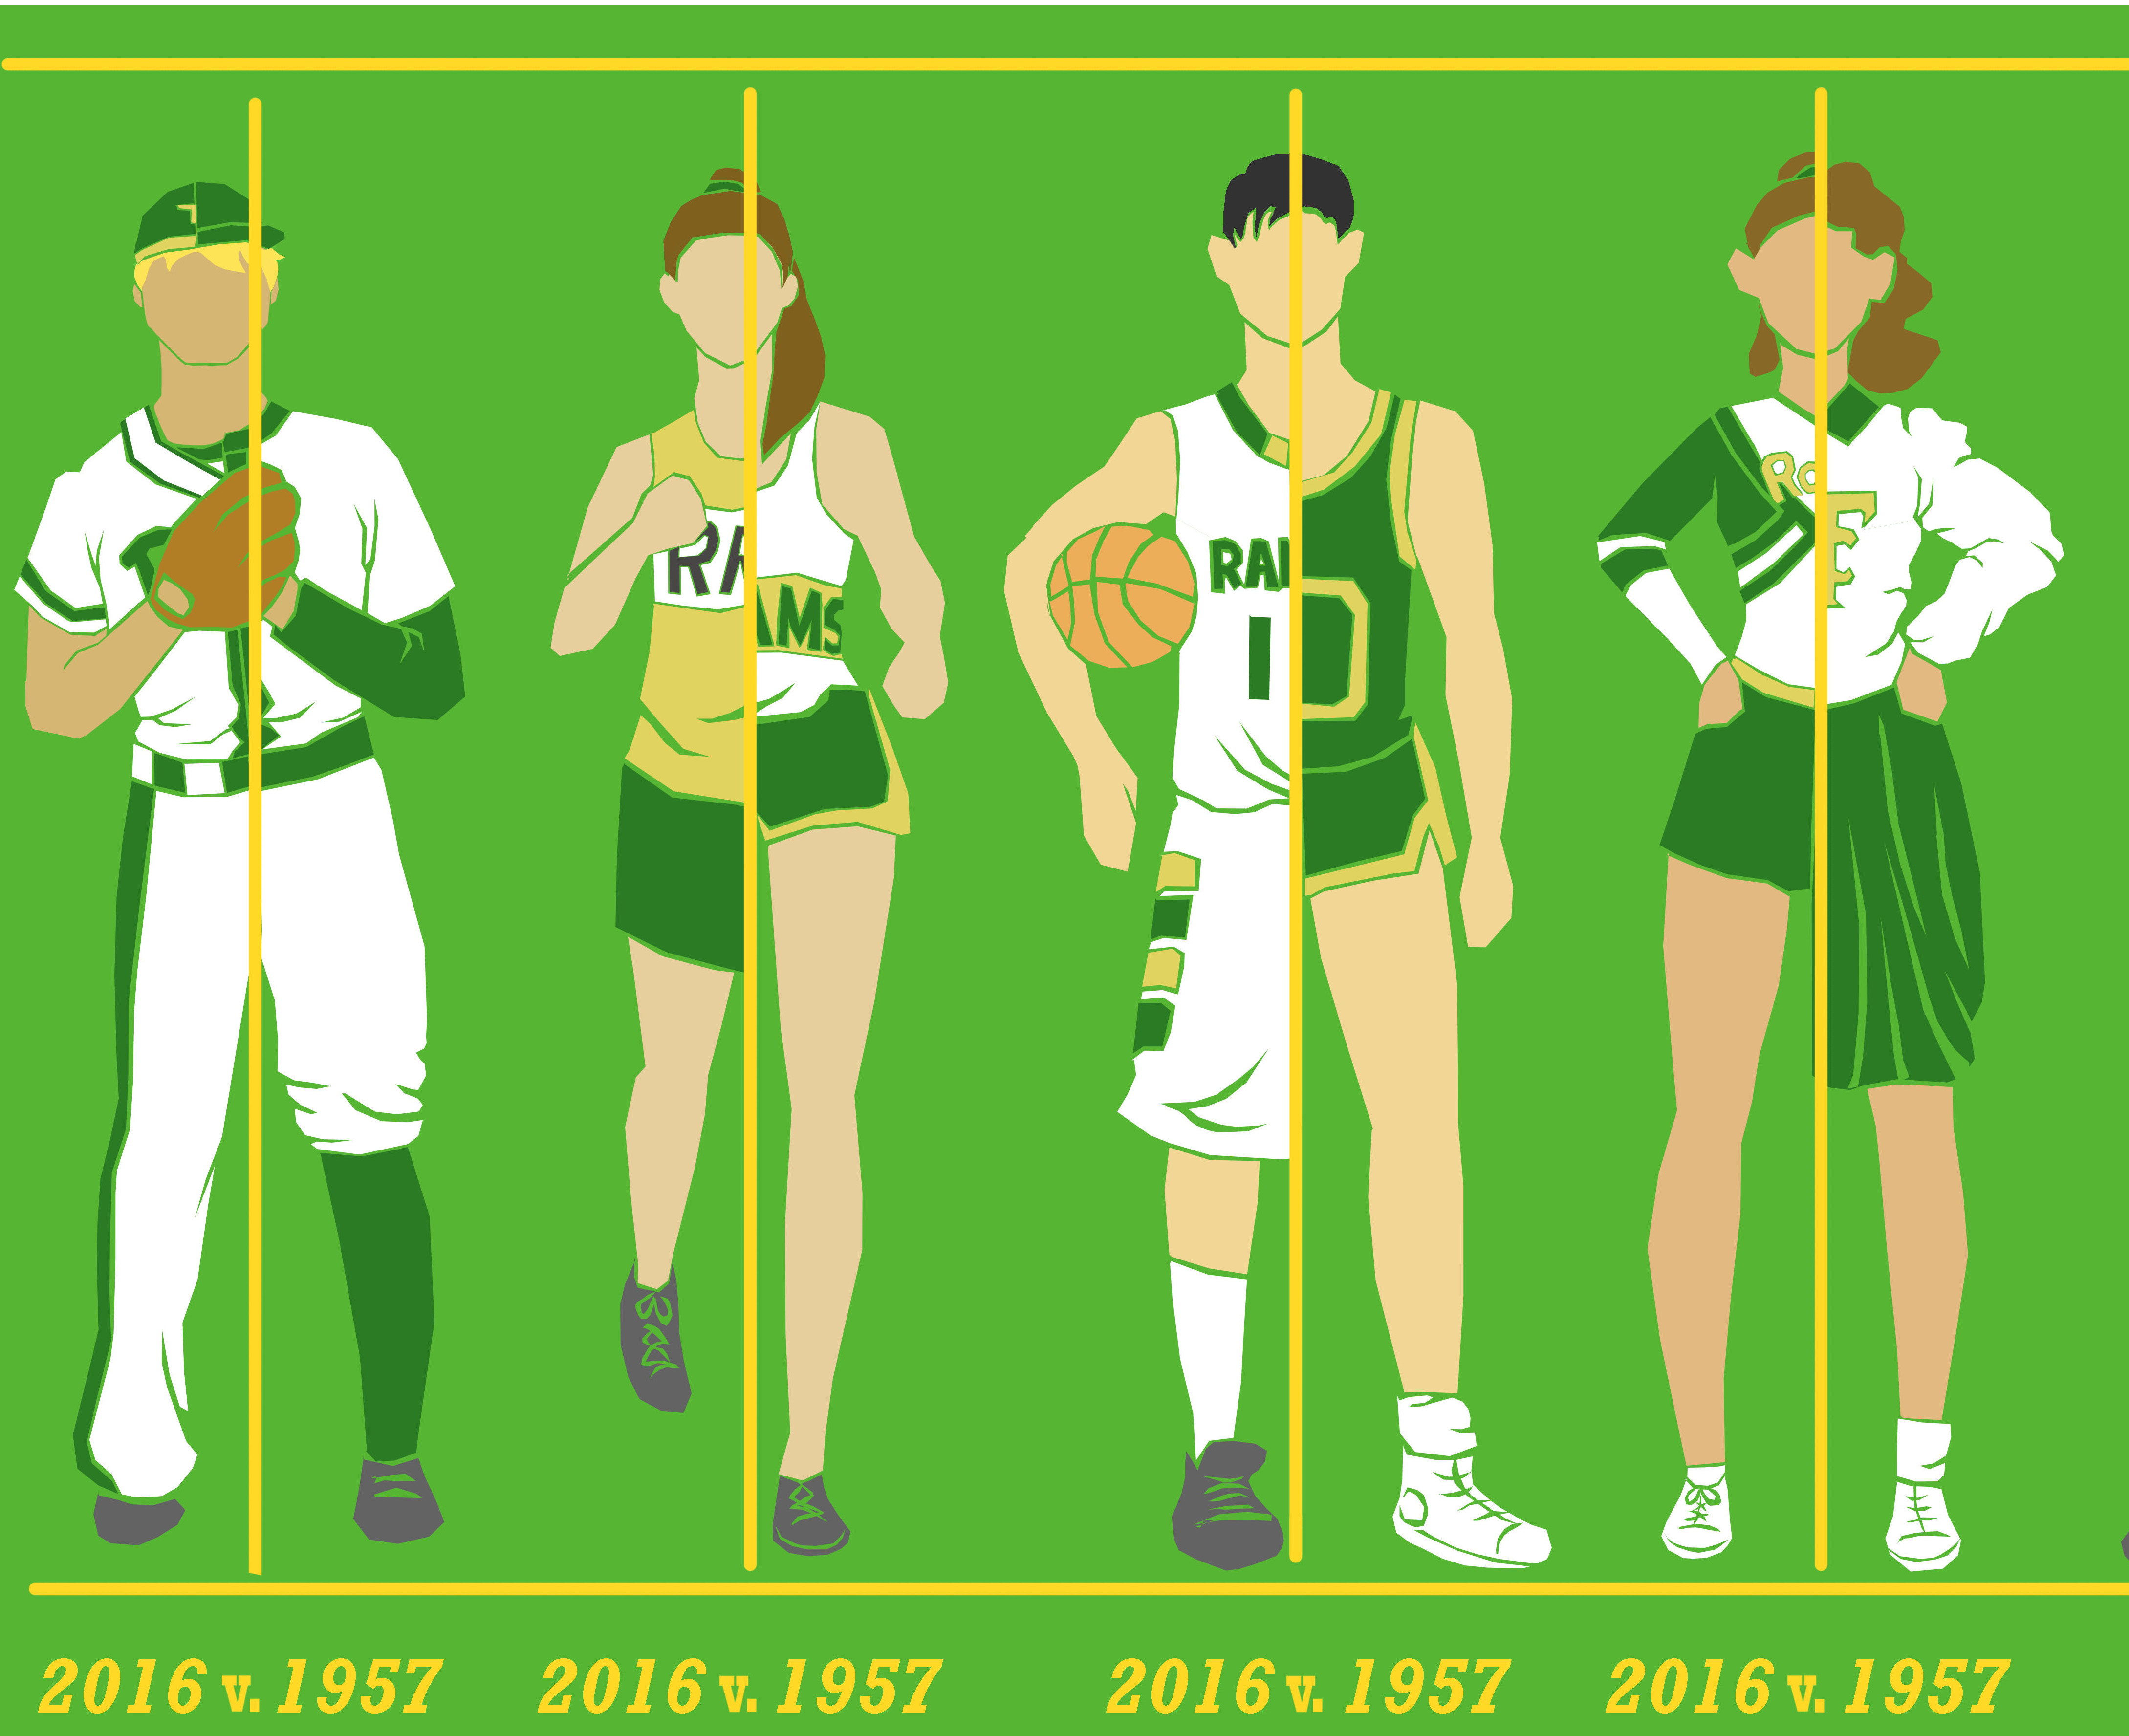 Changing uniforms: from past to present